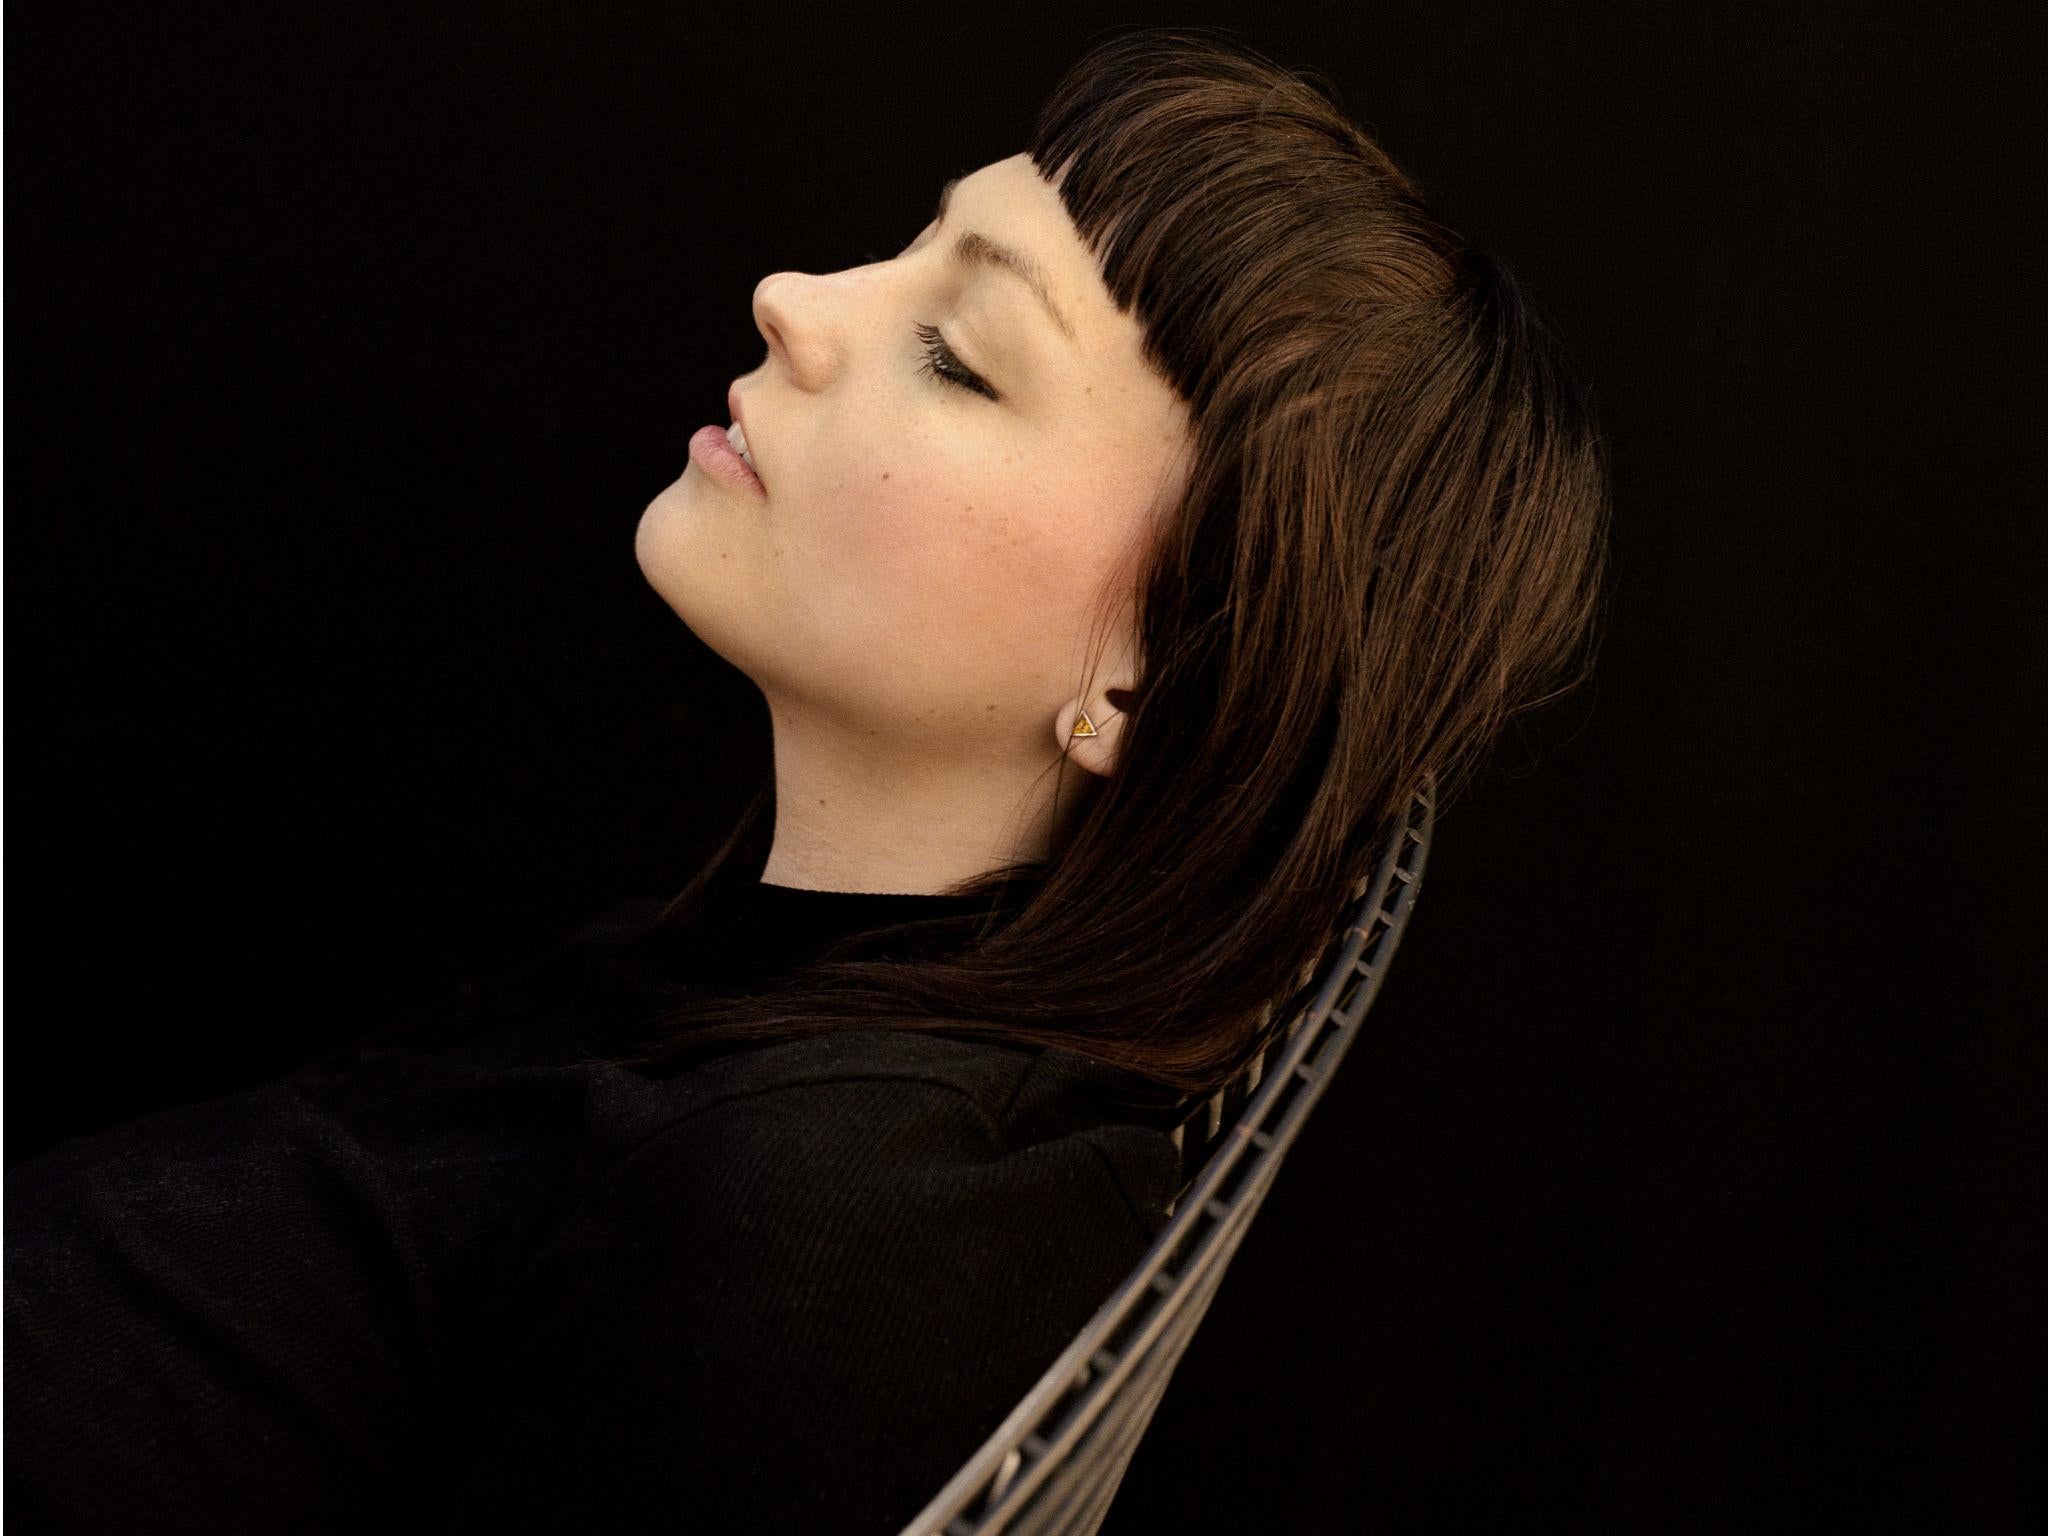 &#13;
Angel Olsen’s unforgetably expressive vibrato voice makes her stand out from other artists &#13;